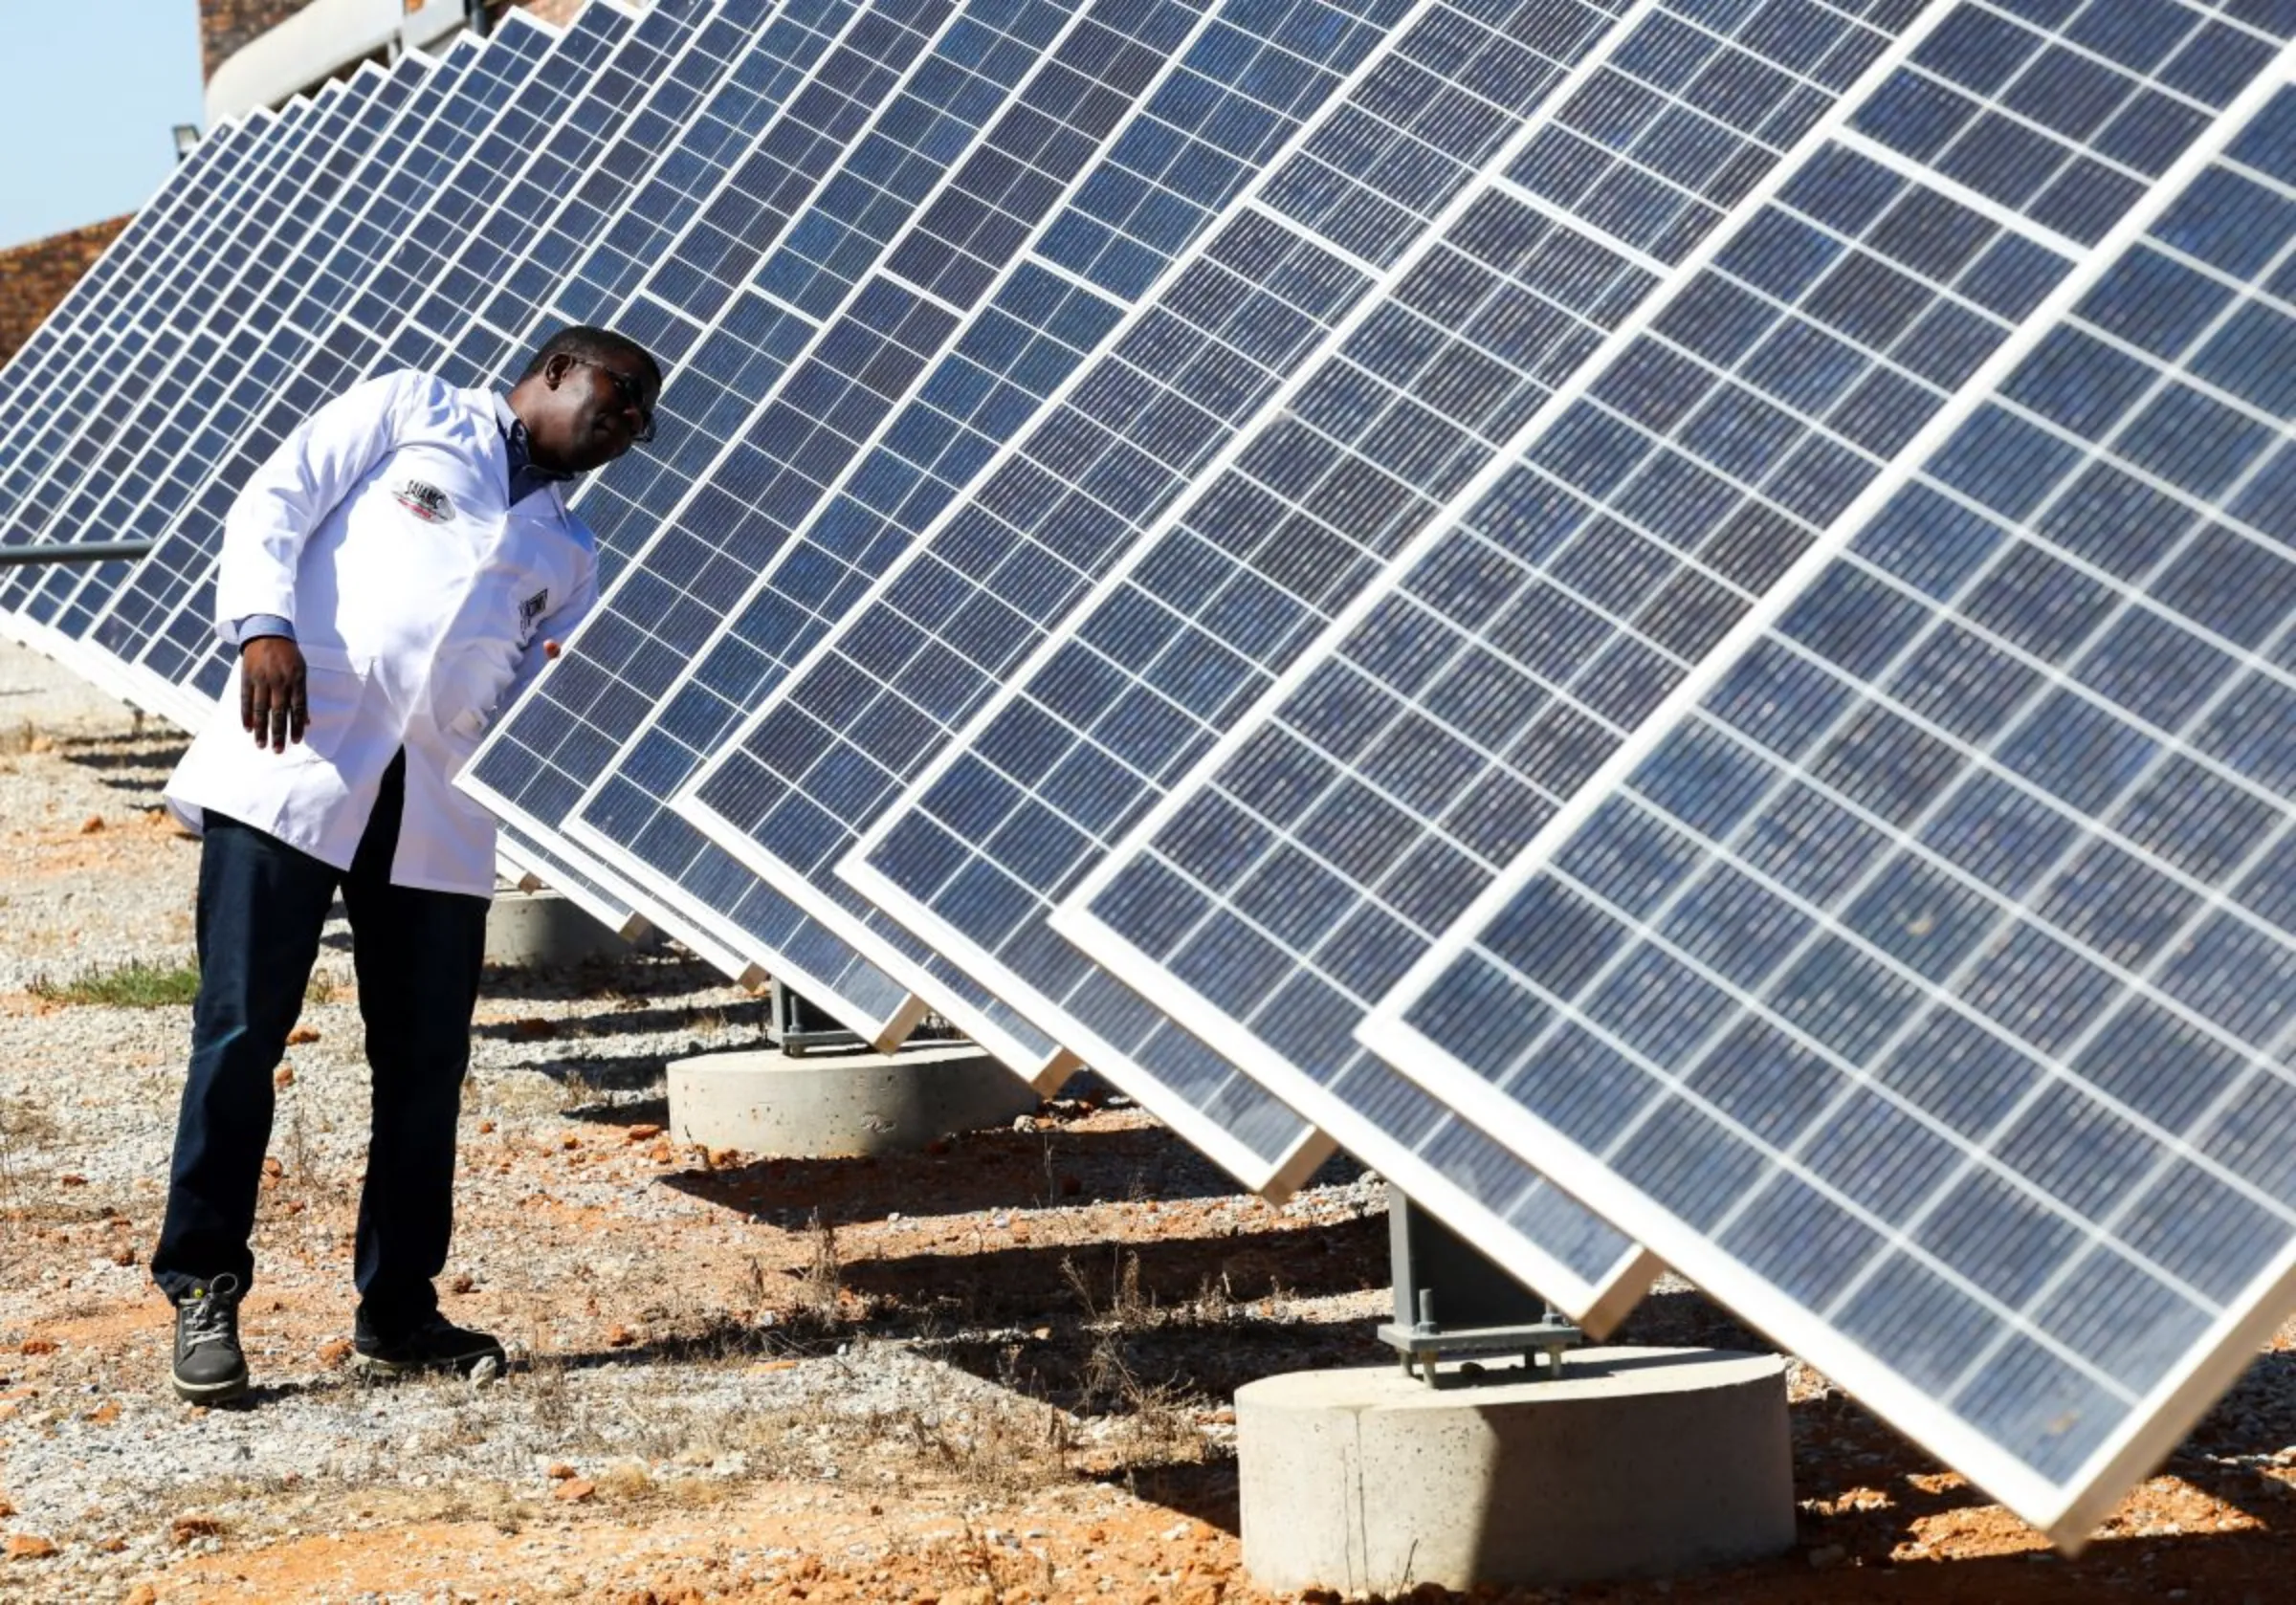 Dr Stanford Chidziva, acting director of Green Hydrogen, looks at the solar panels in the University of the Western Cape, South Africa, November 15, 2022. REUTERS/Esa Alexander